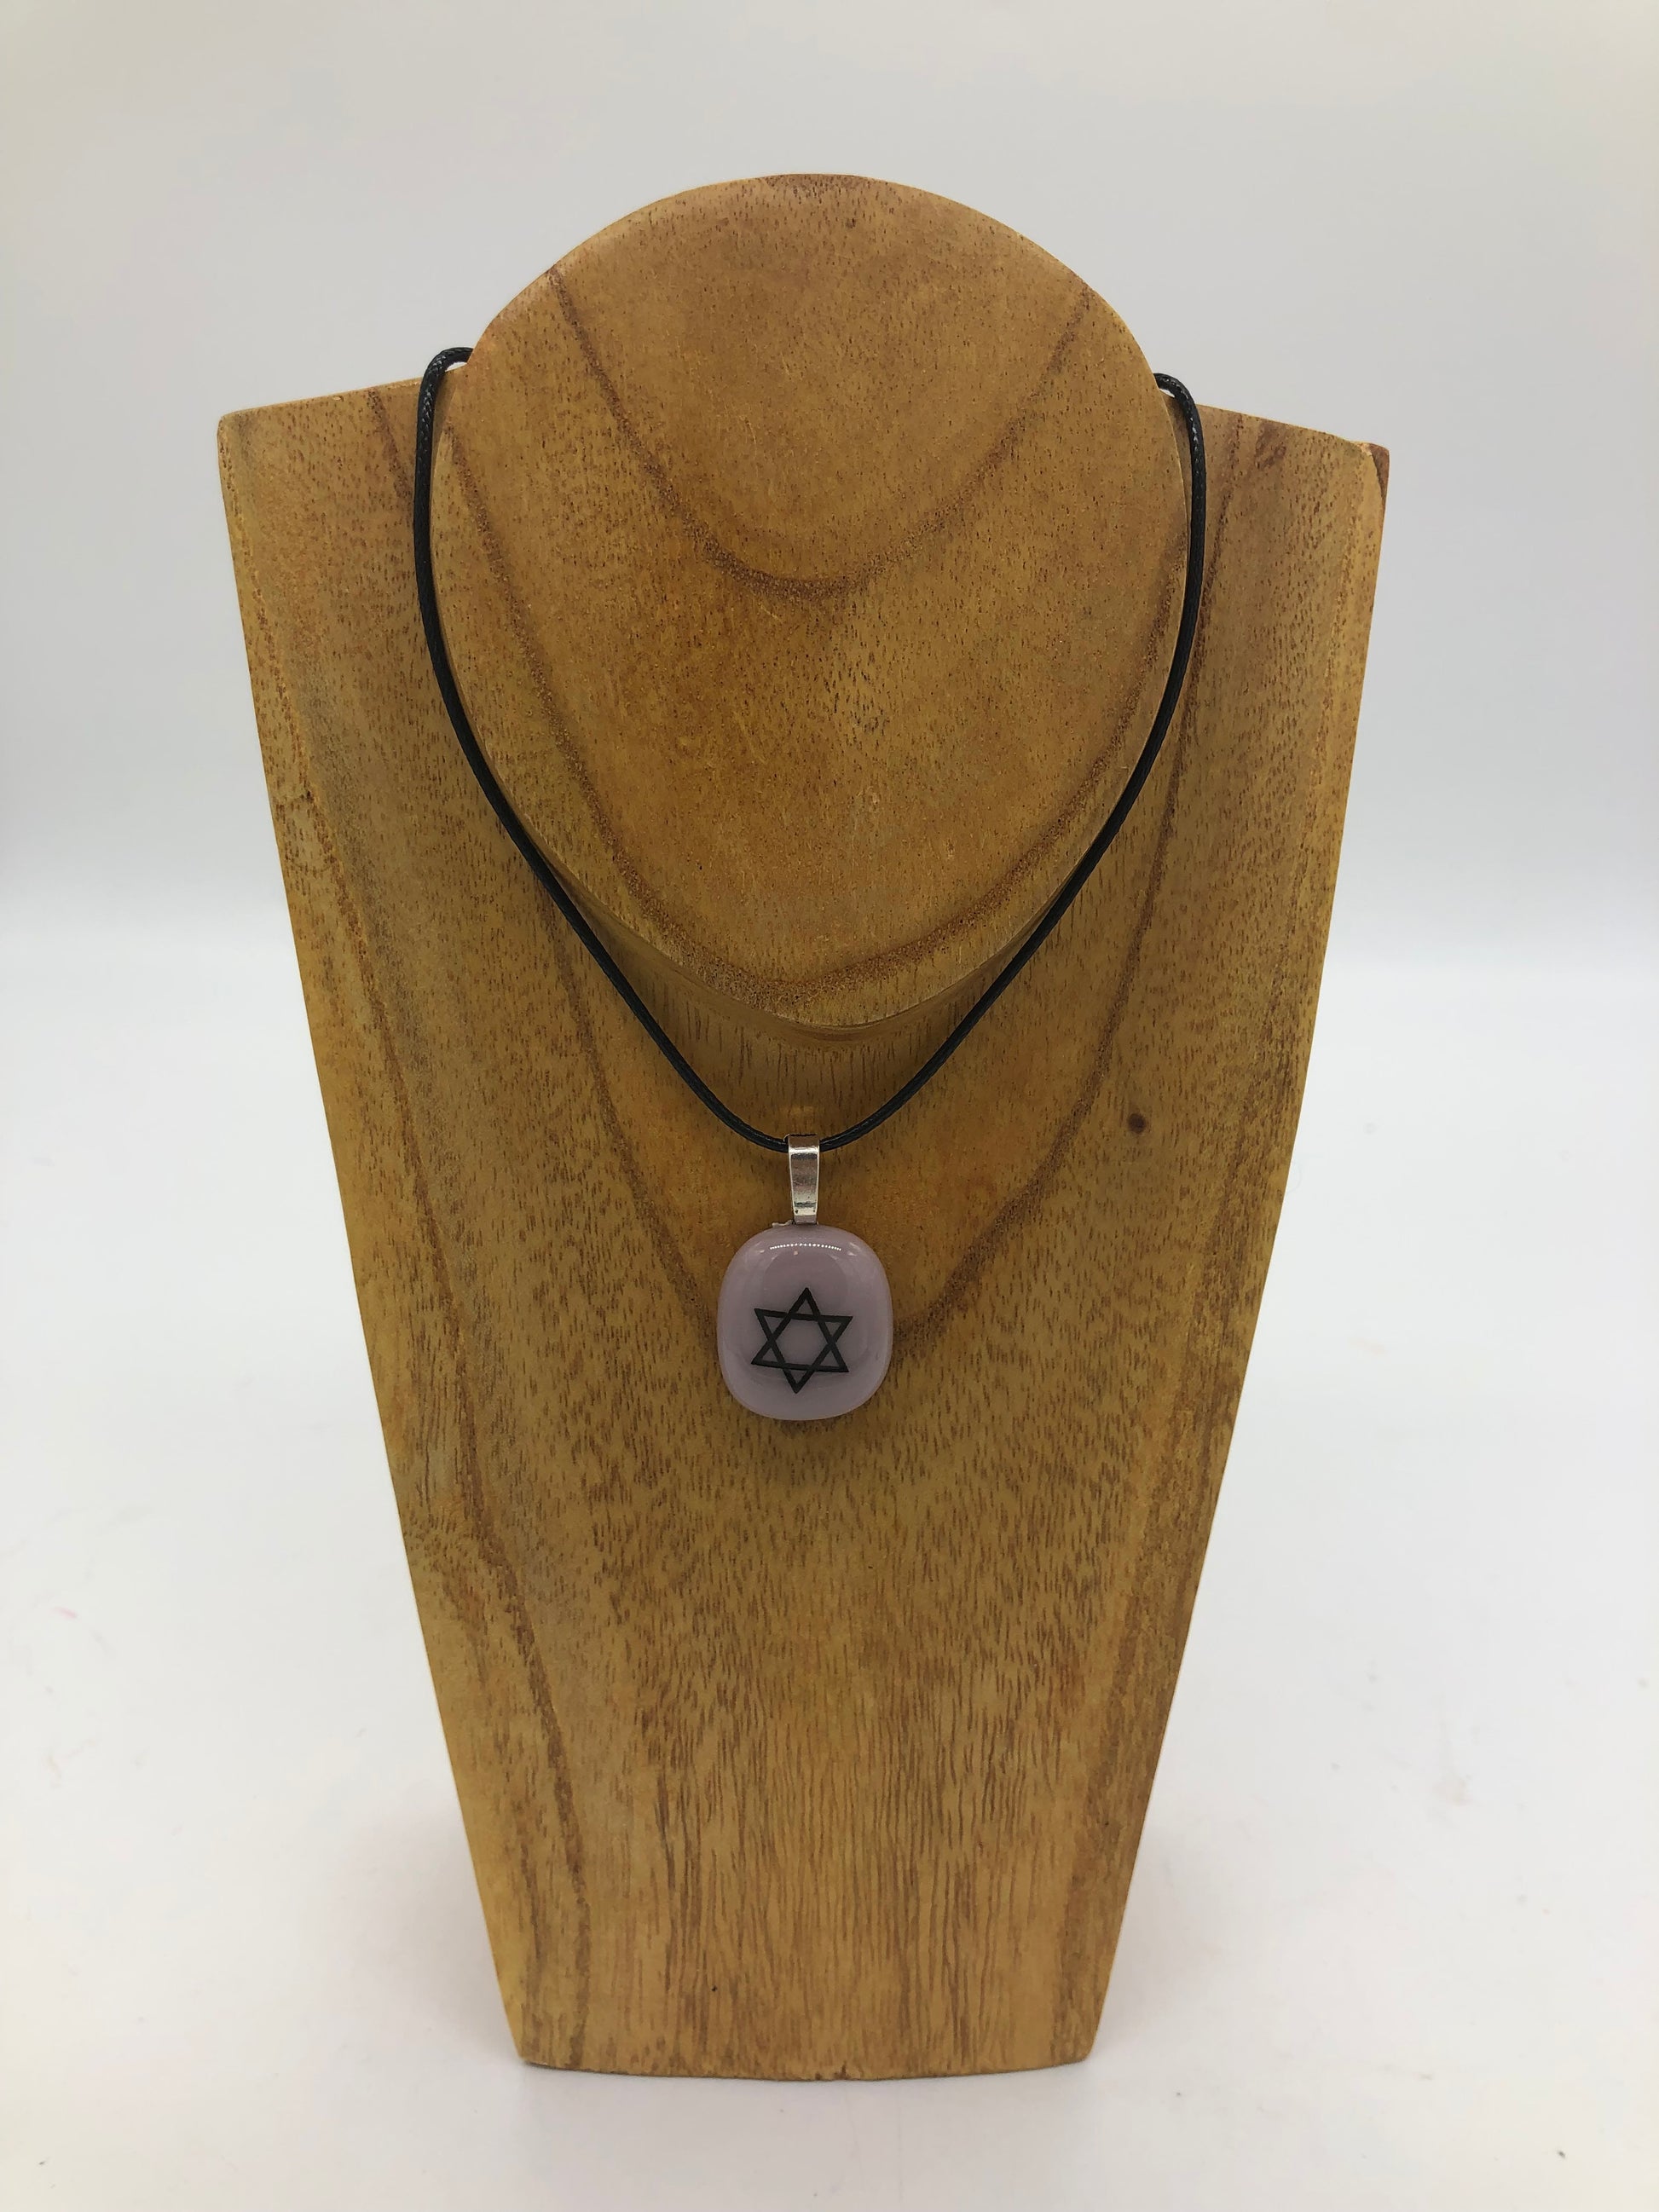 Fused glass necklace on a black cord, displayed on wooden holder.  Necklace design is a mauve circle with white star of David. 